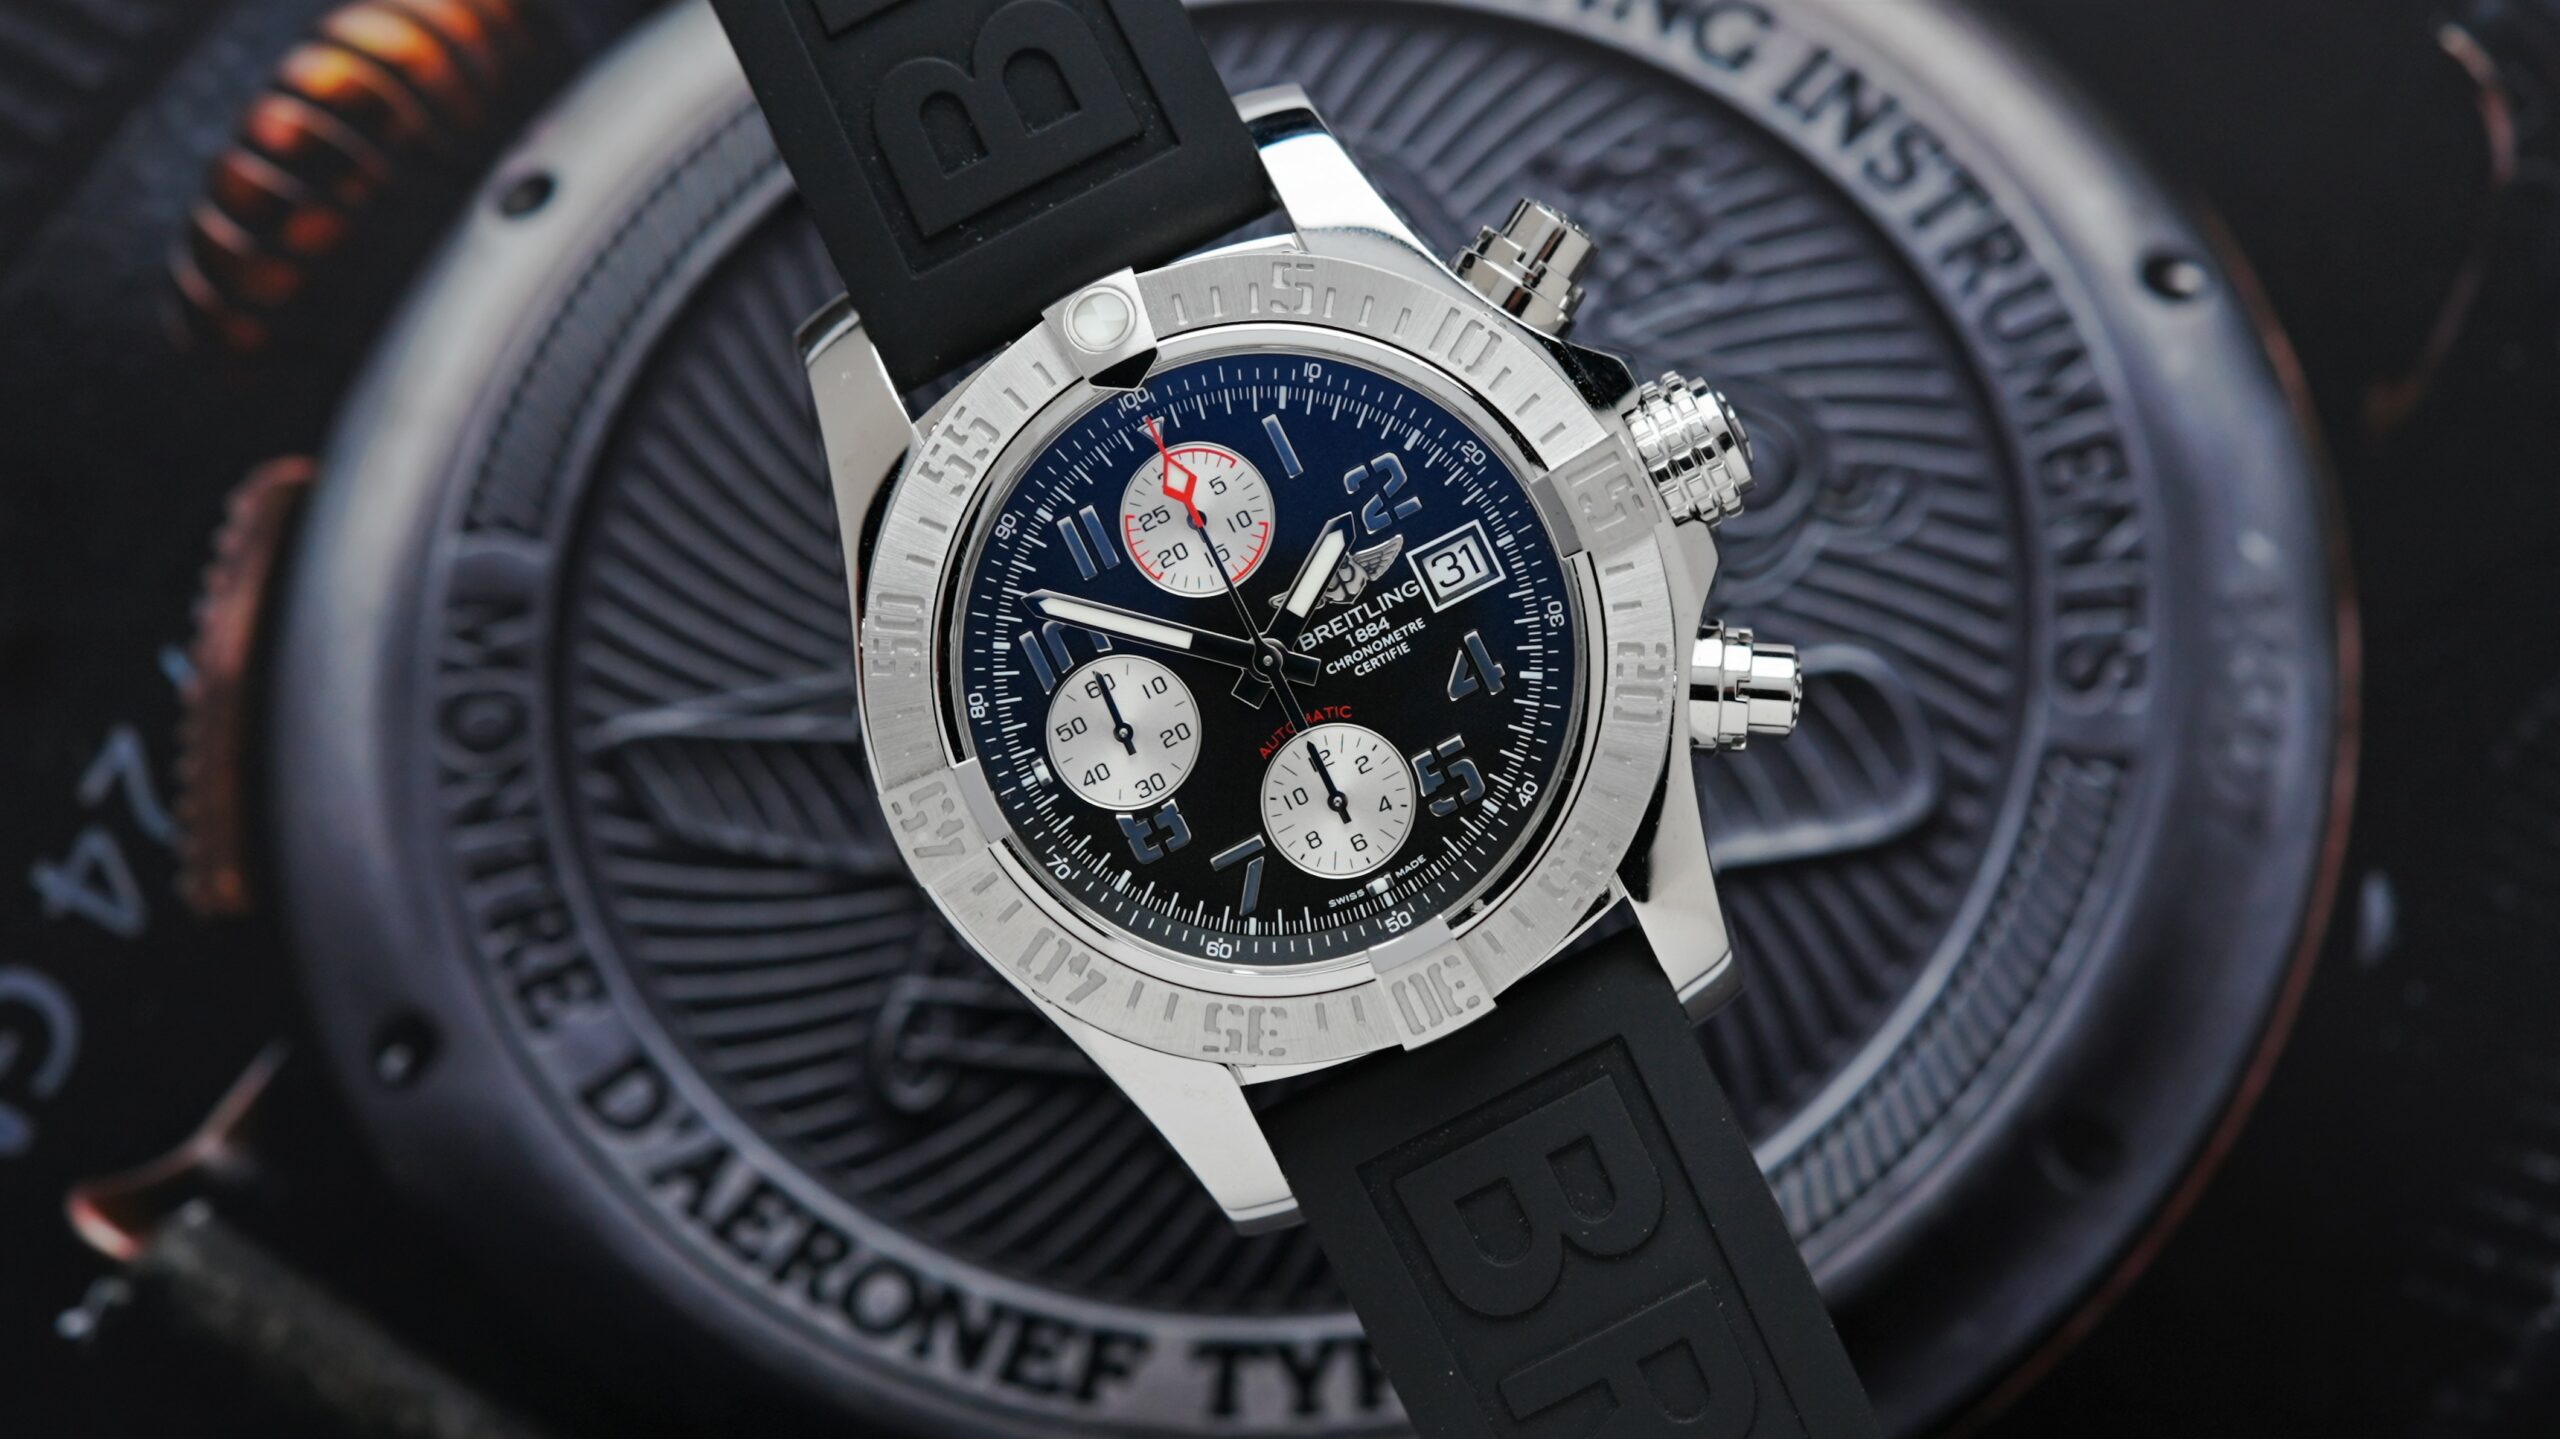 Breitling Avenger II watch displayed on an angle.